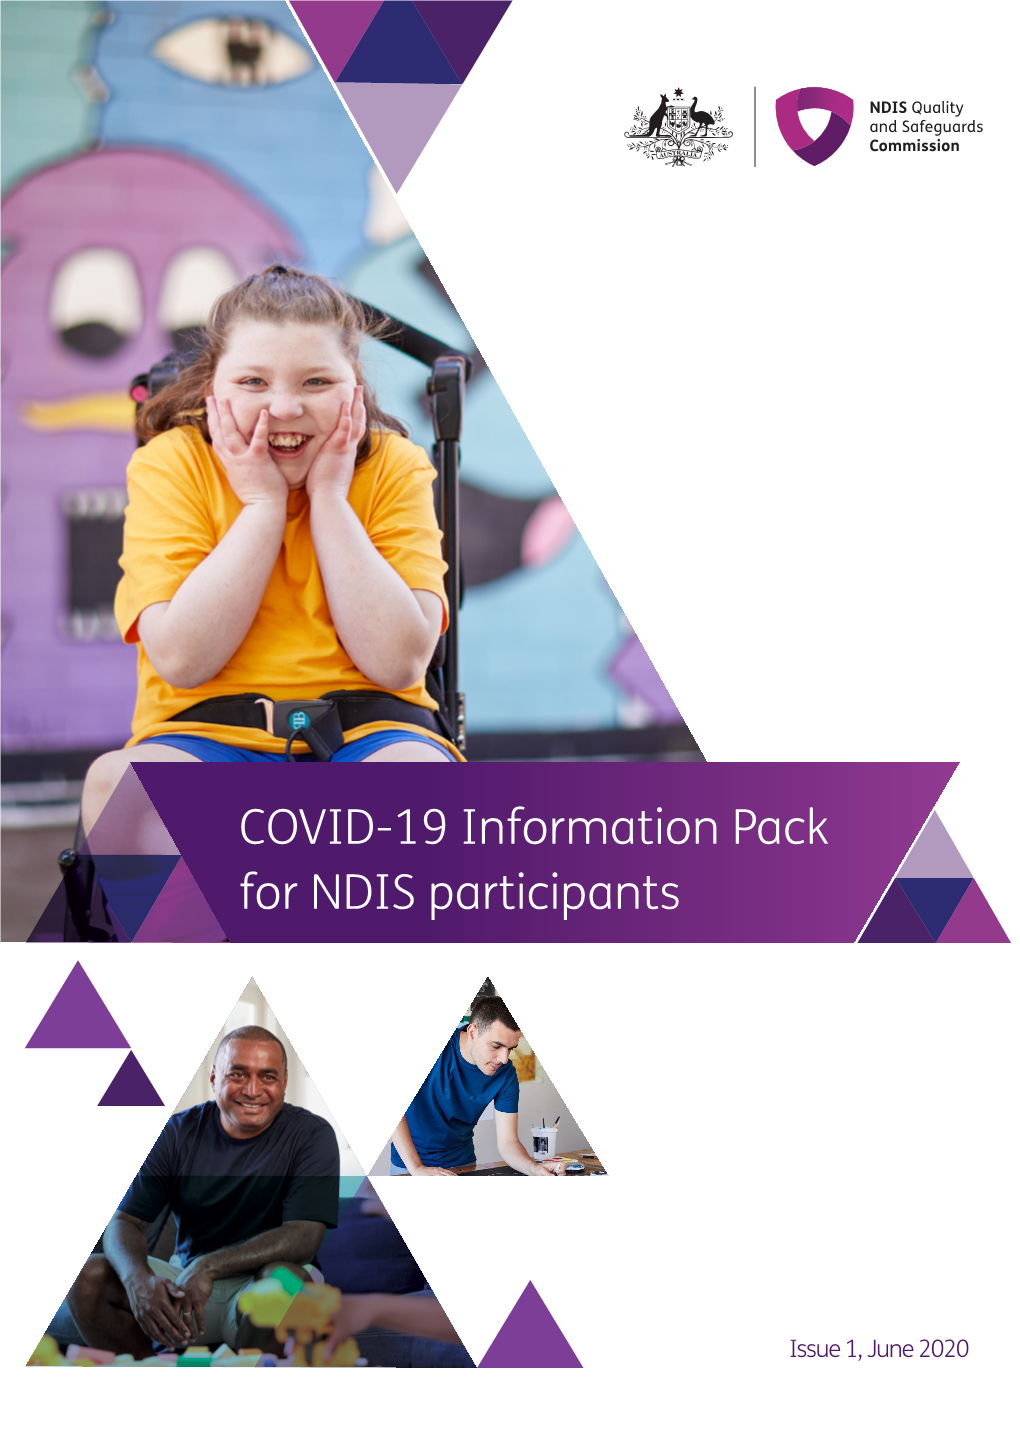 COVID-19 Information Pack for NDIS Participants